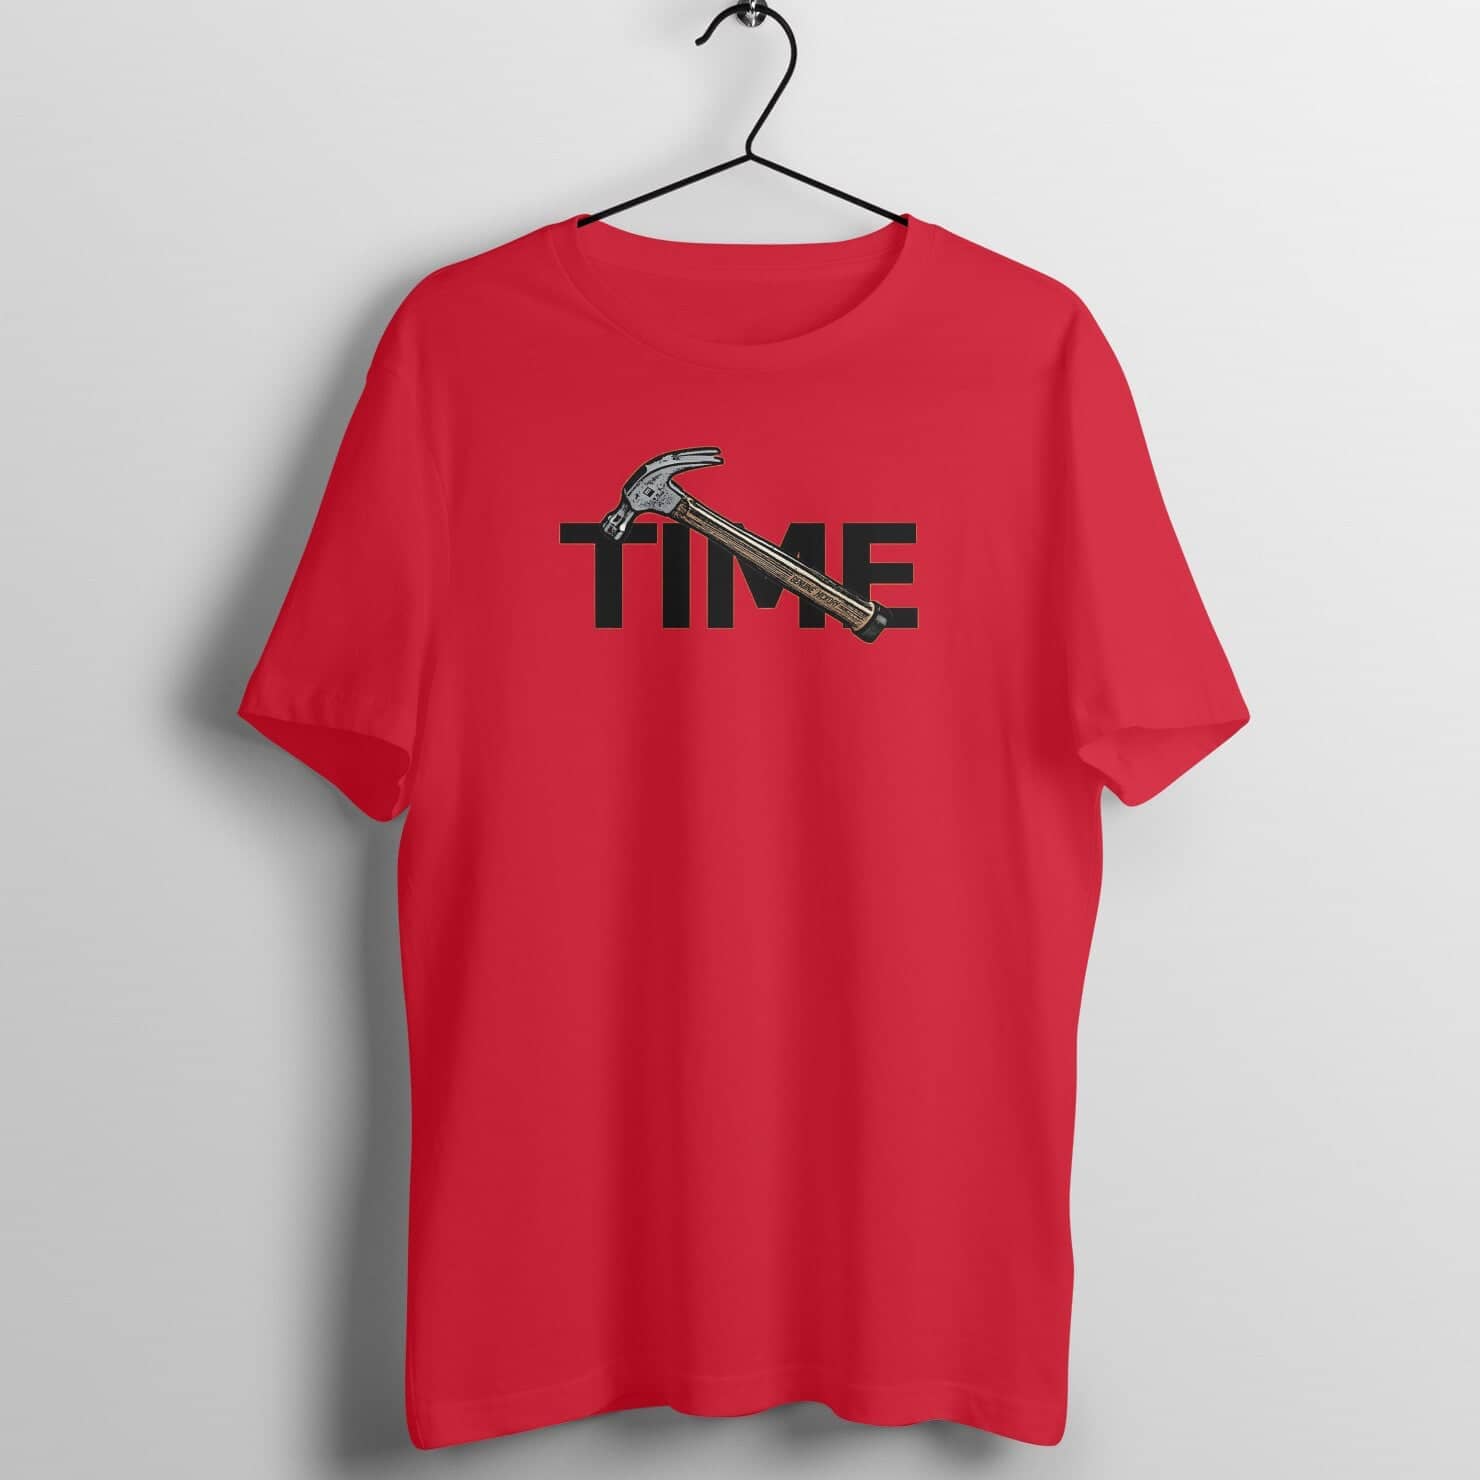 Hammer Time Funny Red T Shirt for Men and Women freeshipping - Catch My Drift India